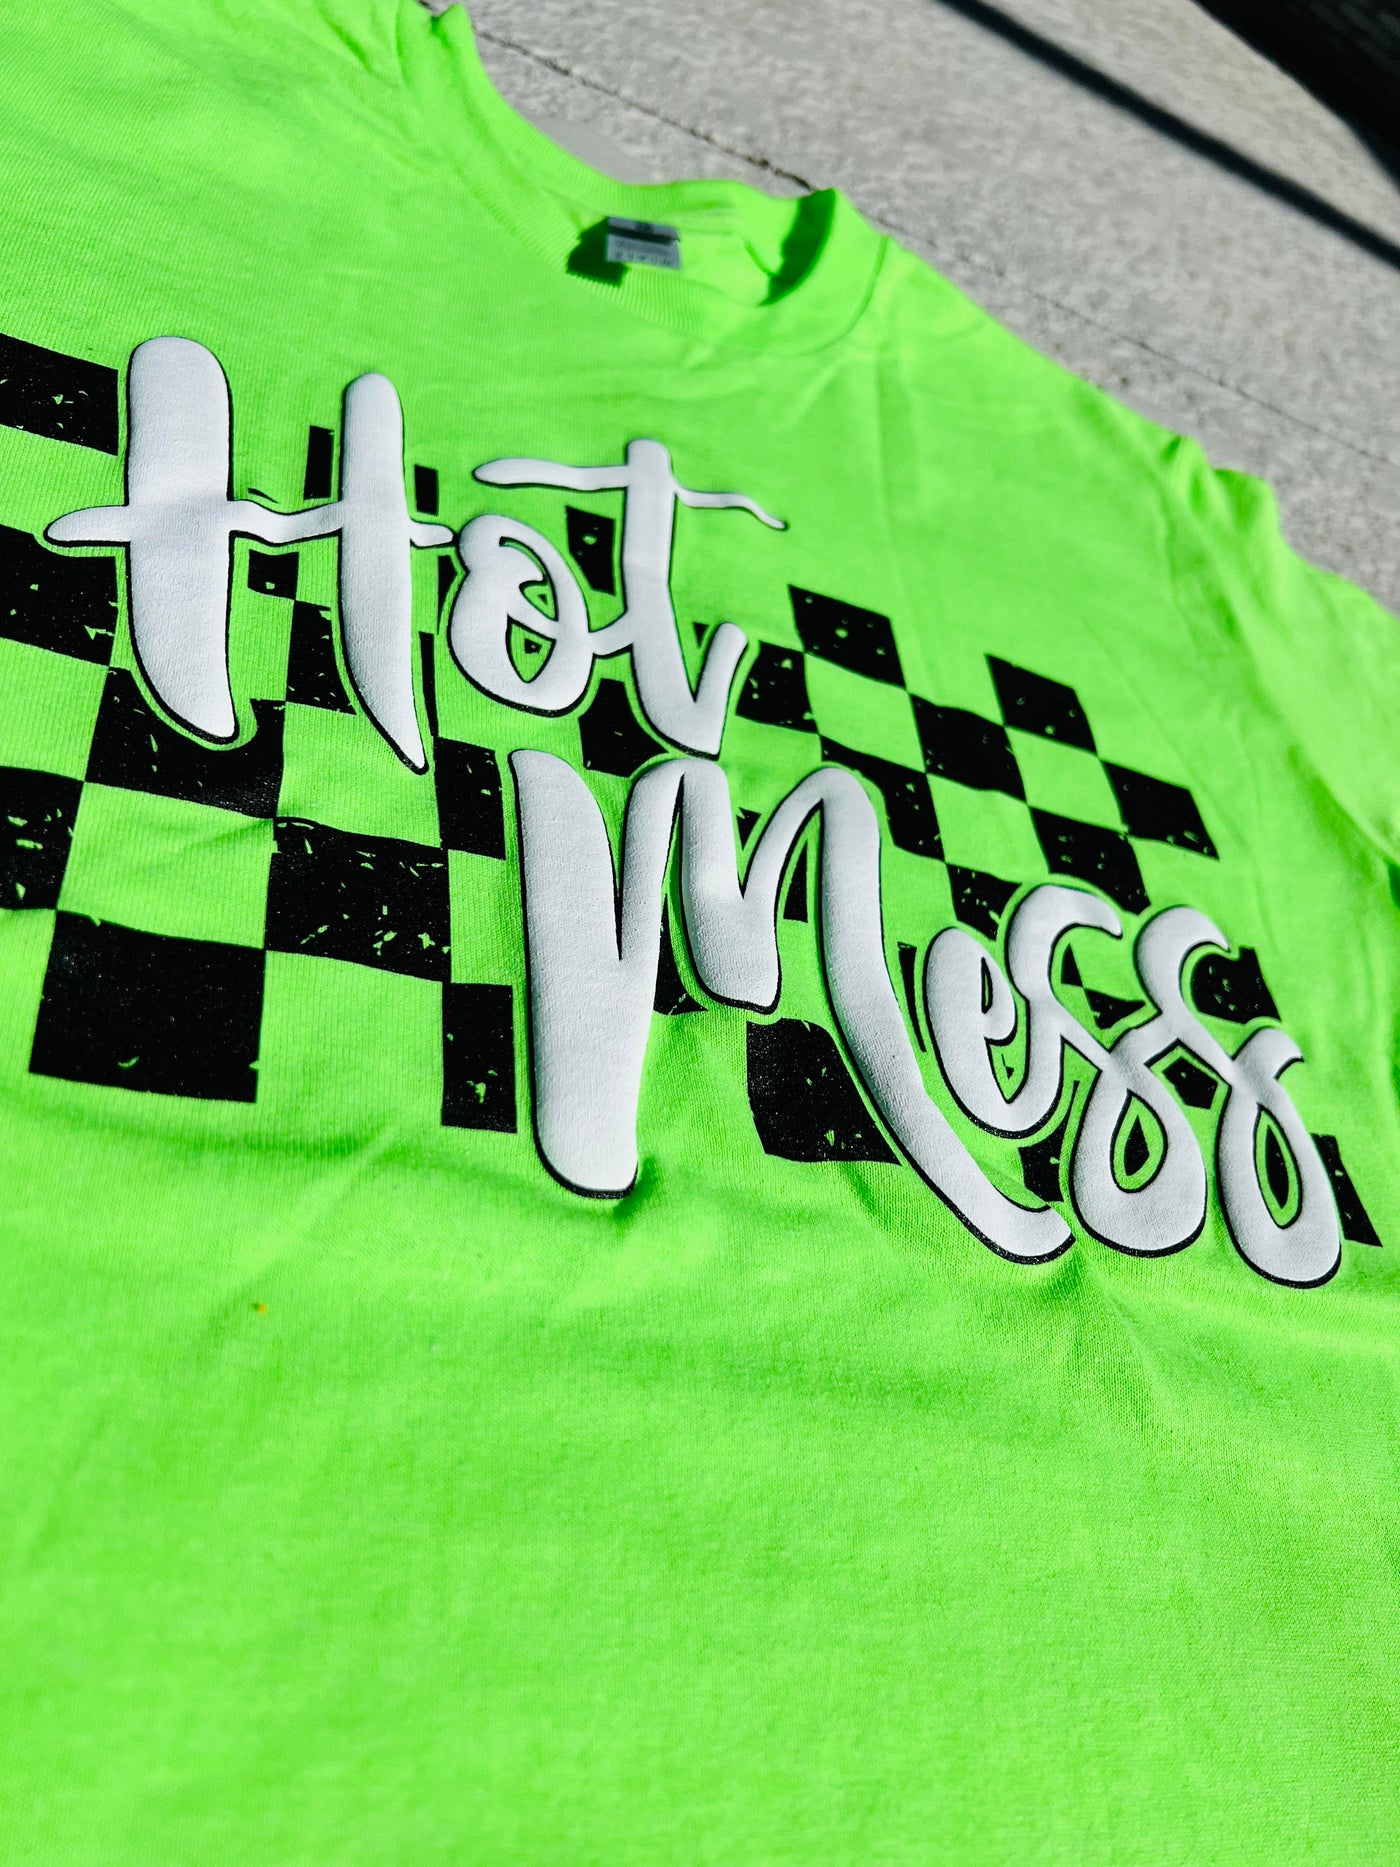 Hot Mess Checkered Graphic T-shirt in Neon Green